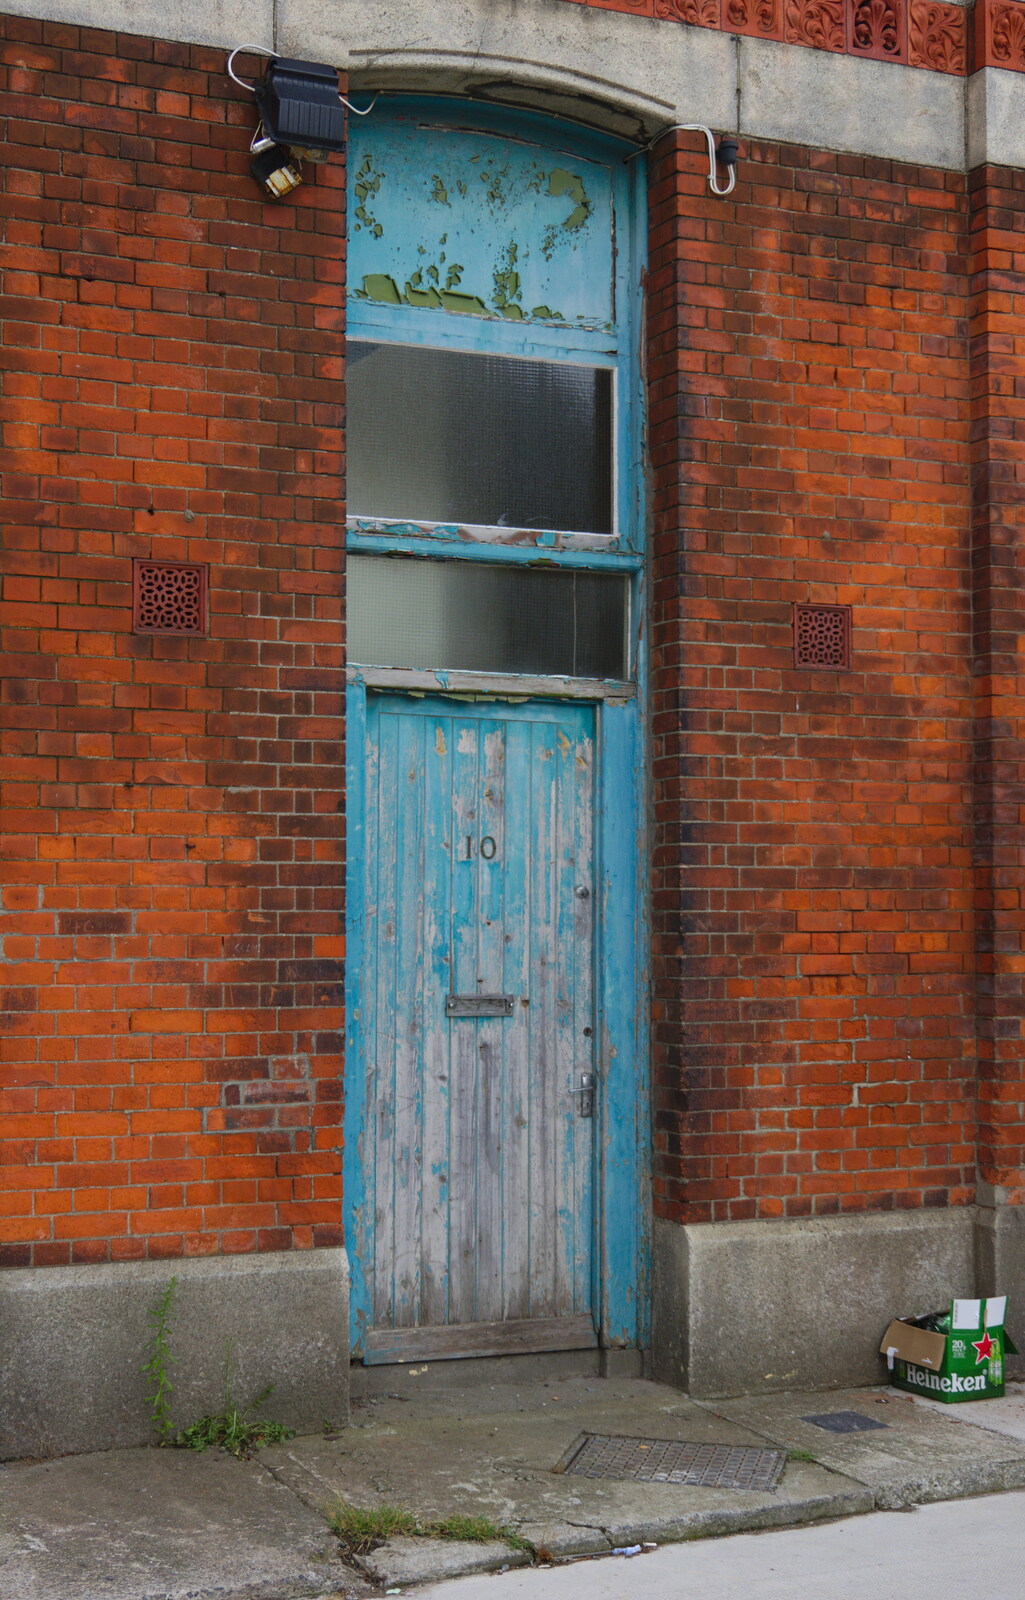 A faded door from Jimmy and Catherina's, Ballsbridge, Dublin - 10th August 2019